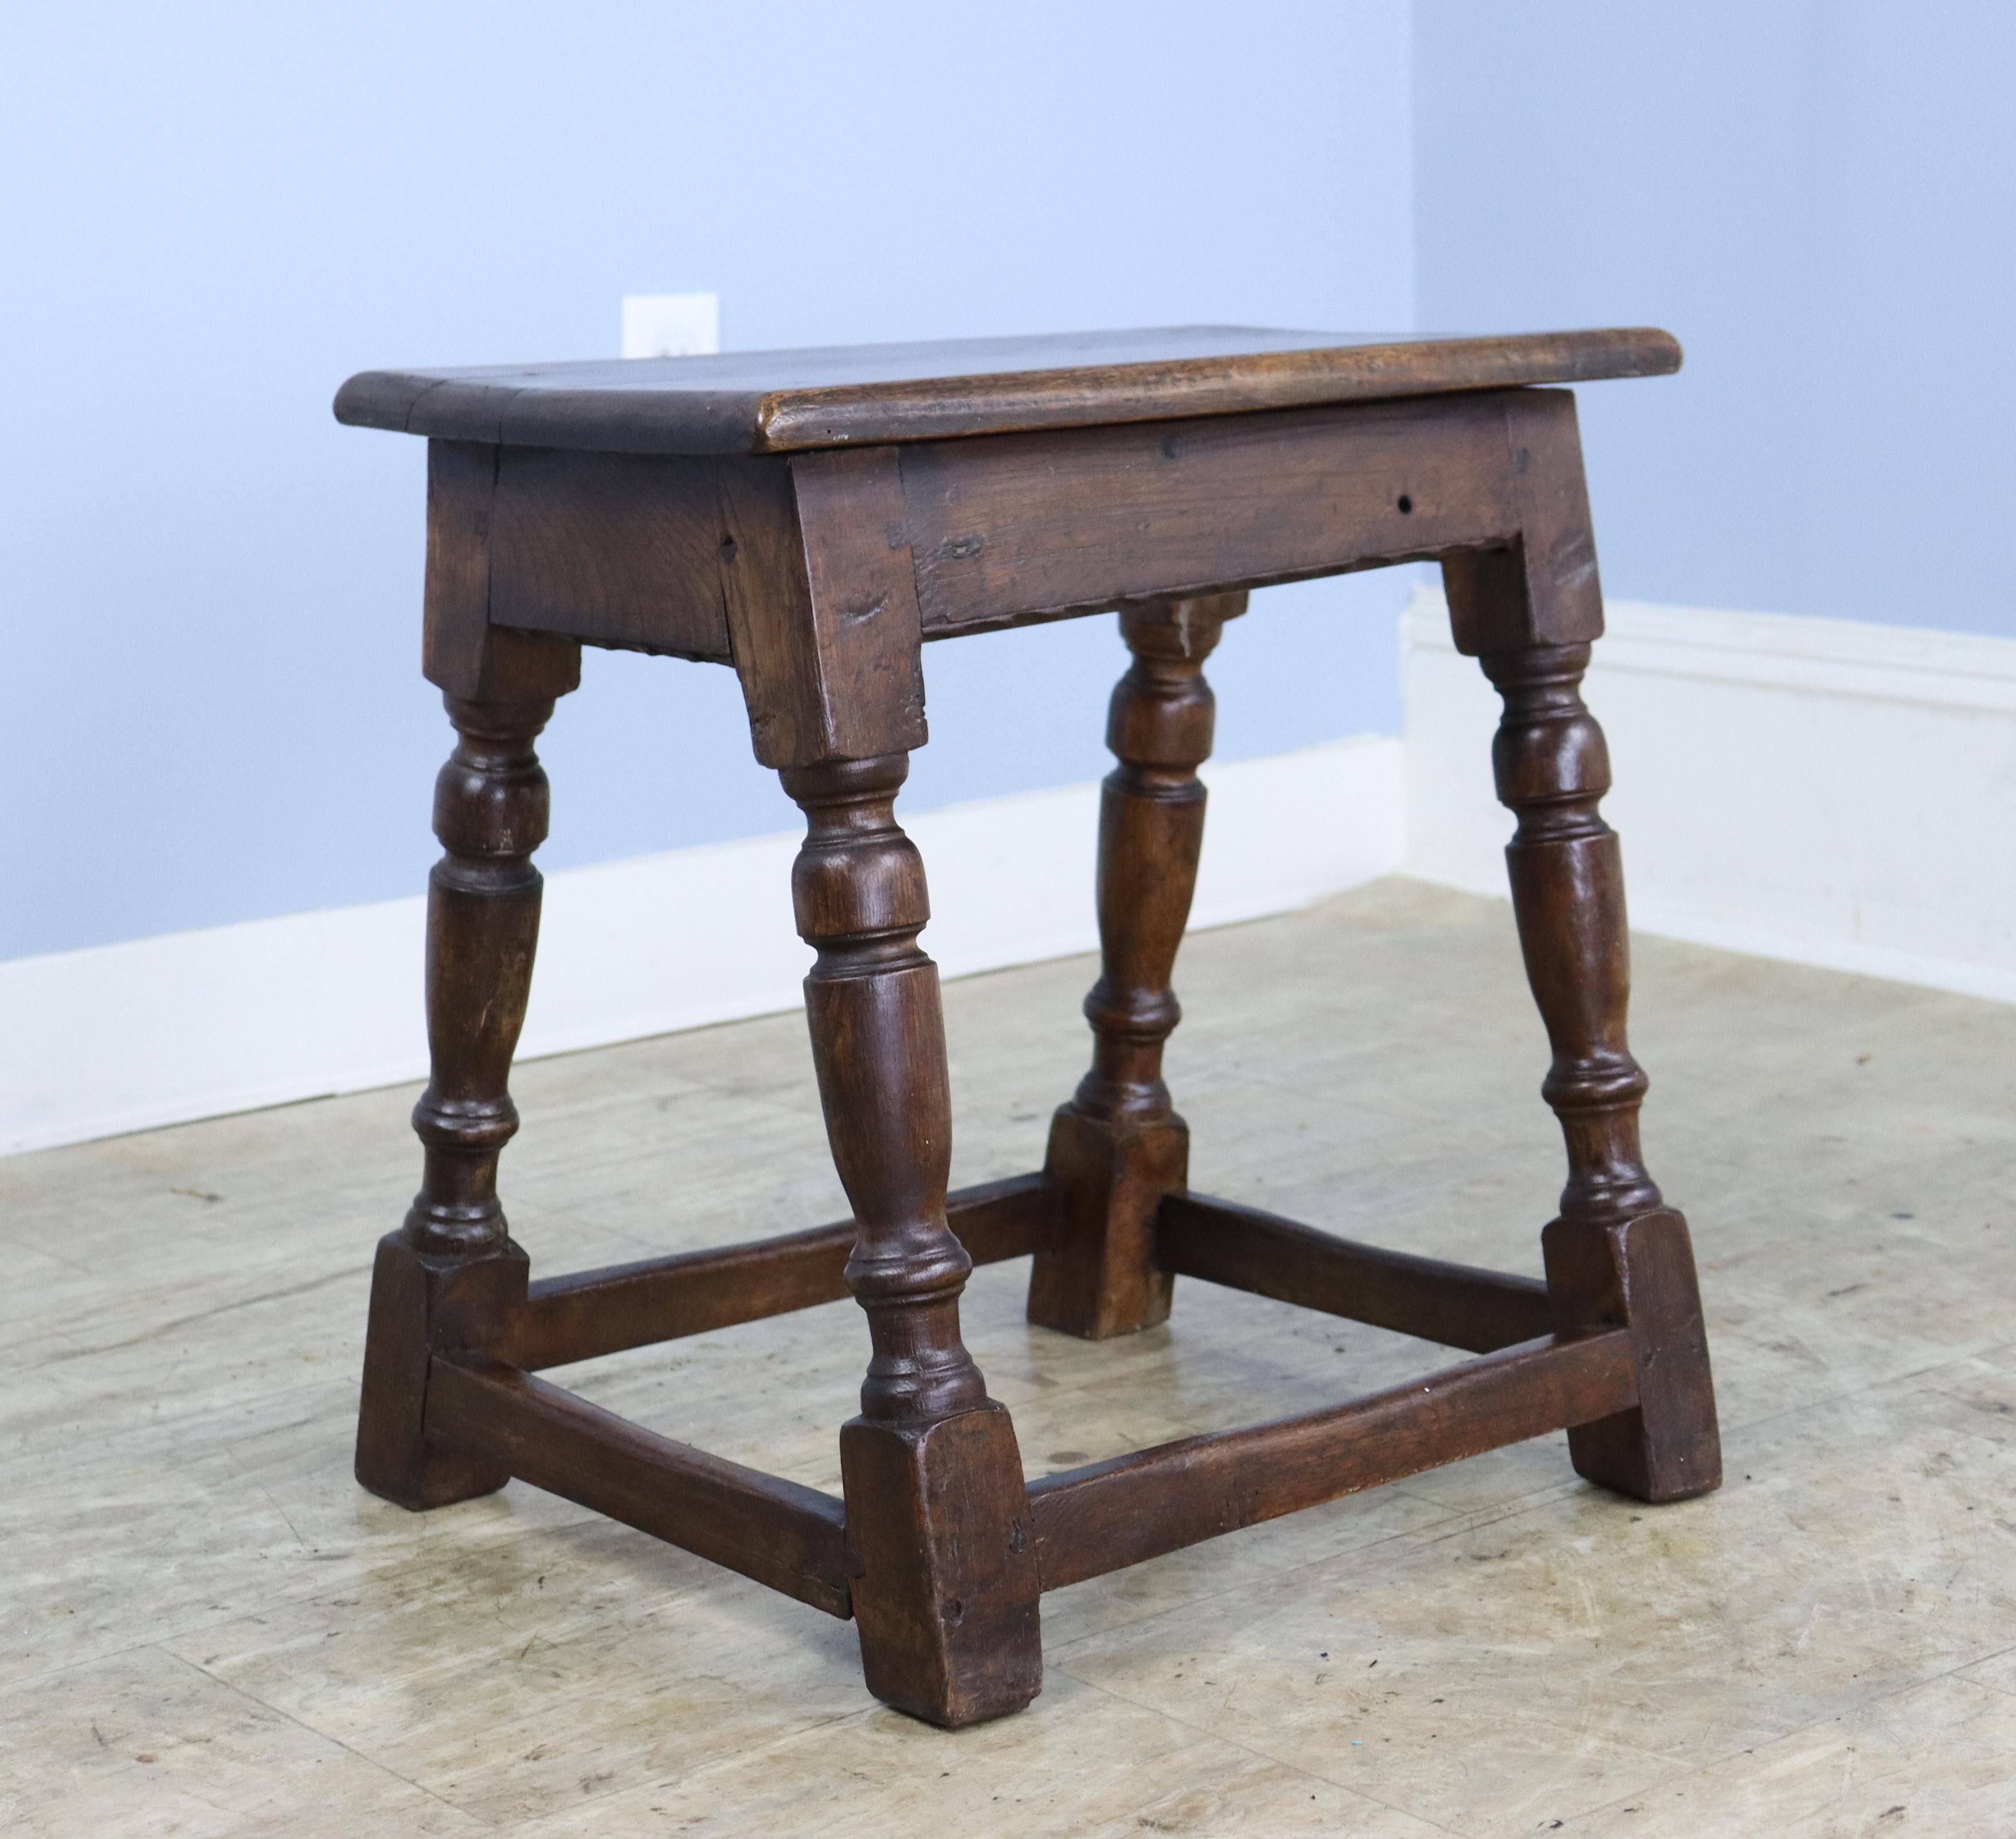 A long carved oak footstool, chunky and handsome. The turned legs add an additional design note. Perfect as a fireside perch or at the end of a guest bed. There is a small hole in the apron of the seat, visible in thumbnails.